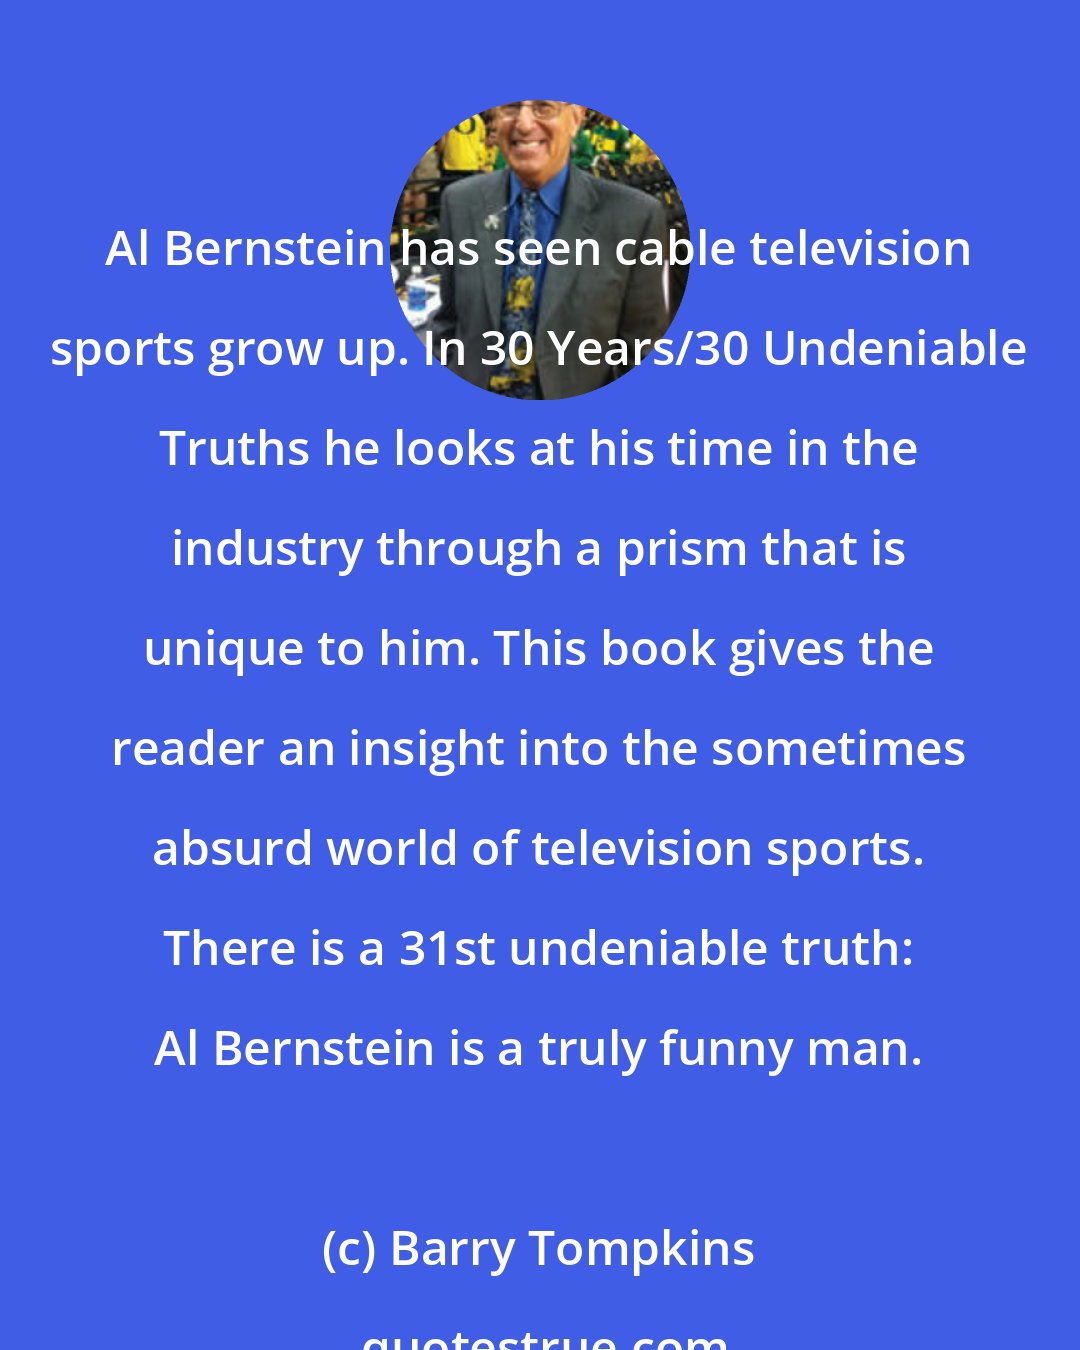 Barry Tompkins: Al Bernstein has seen cable television sports grow up. In 30 Years/30 Undeniable Truths he looks at his time in the industry through a prism that is unique to him. This book gives the reader an insight into the sometimes absurd world of television sports. There is a 31st undeniable truth: Al Bernstein is a truly funny man.